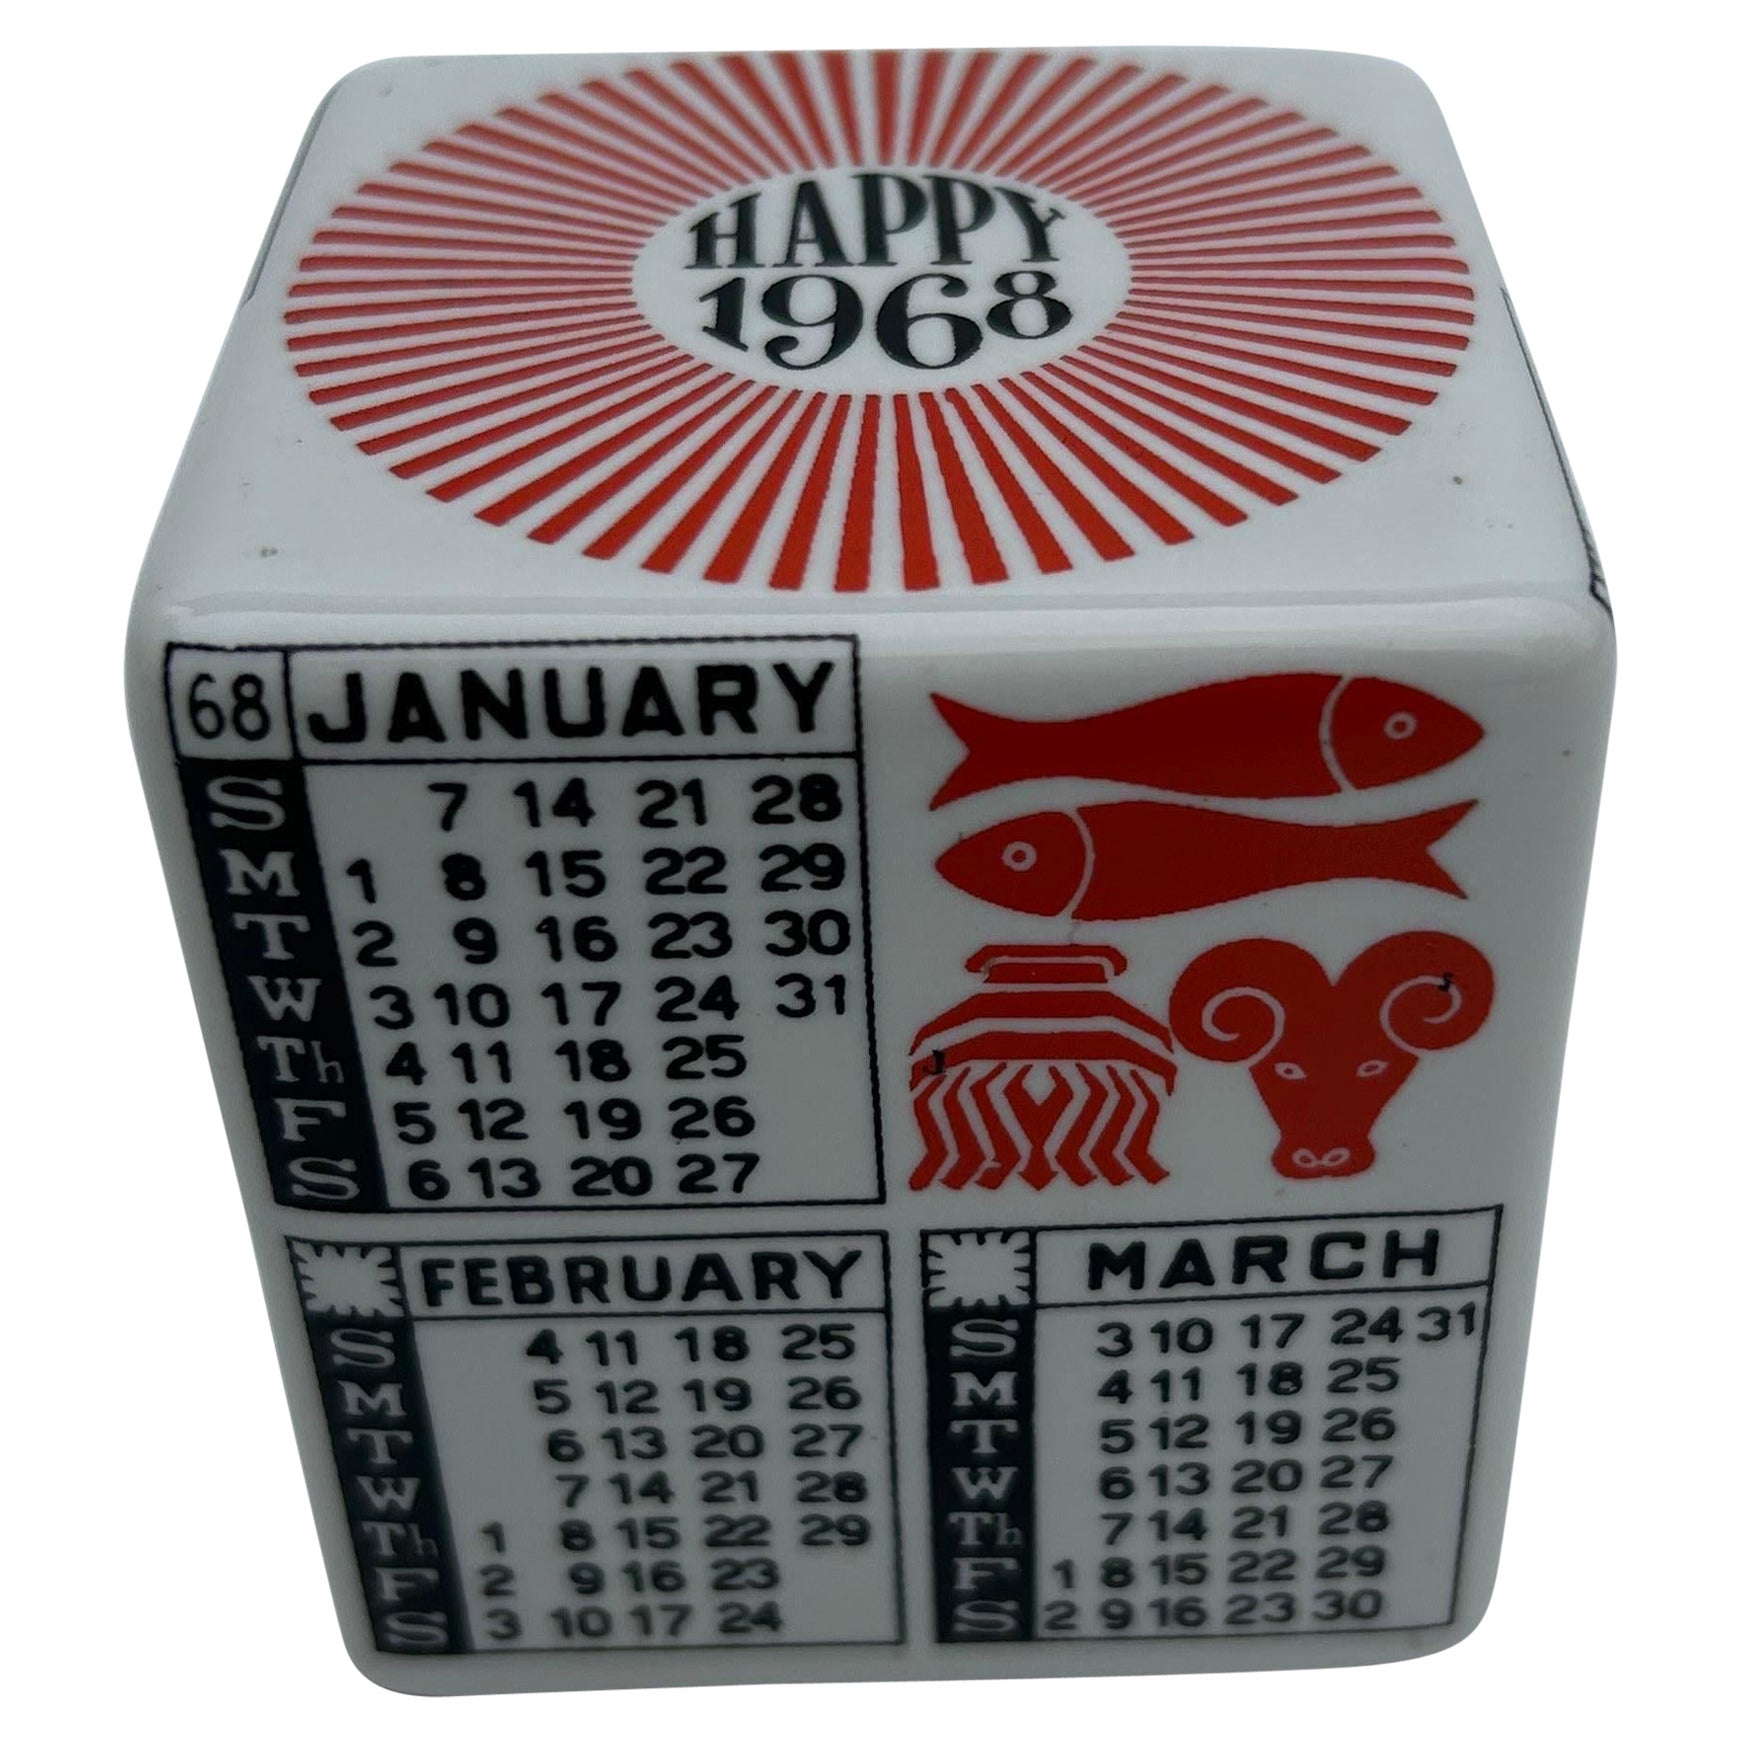 20th Century Piero Fornasetti Paperweight Calendar Happy 1968 Porcelain For Sale